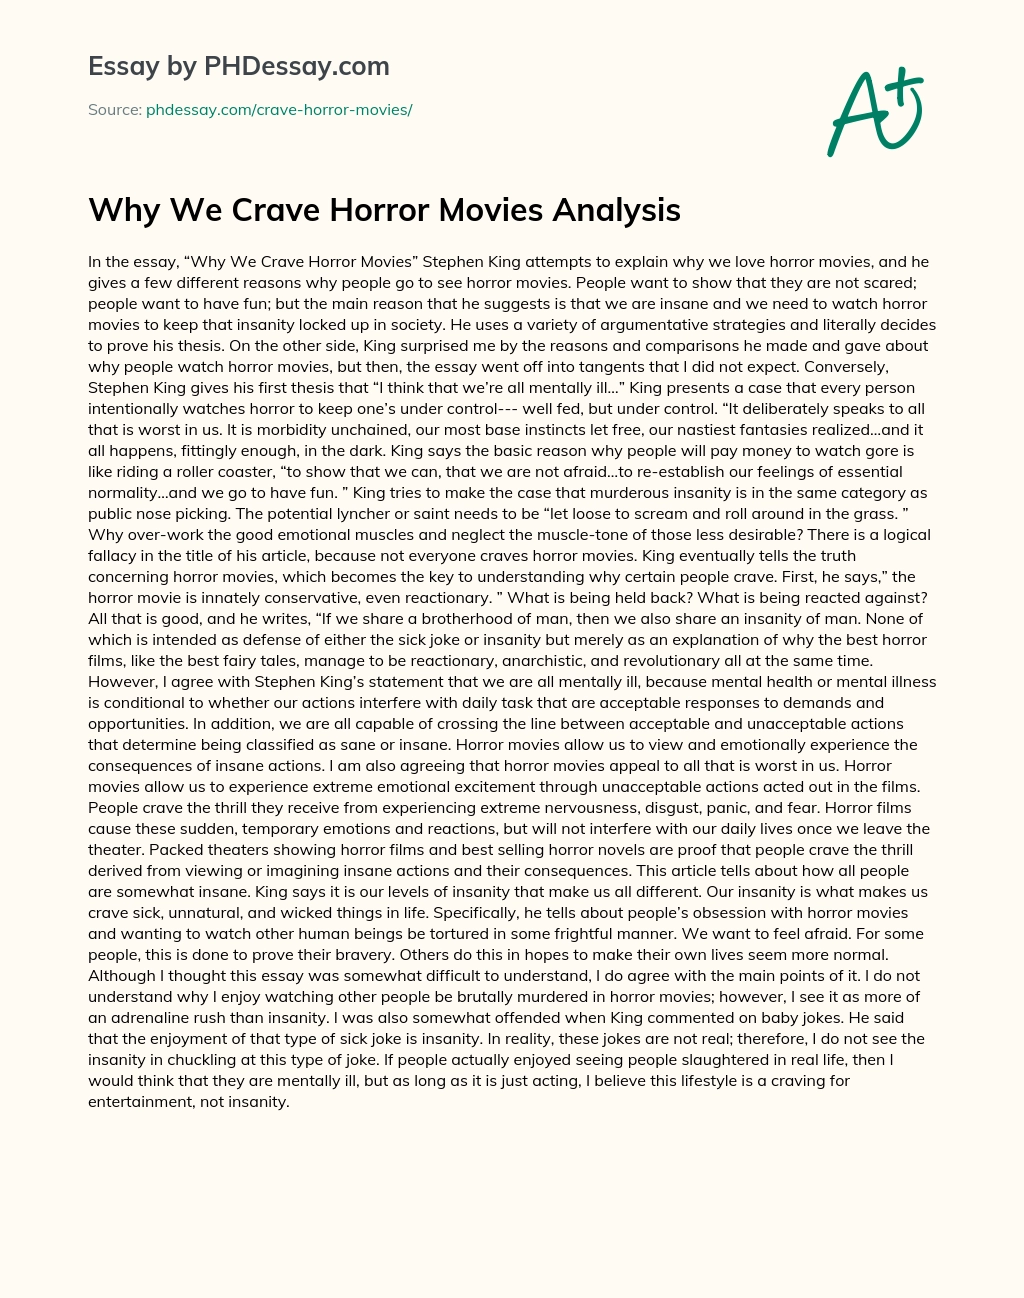 Why We Crave Horror Movies Analysis essay